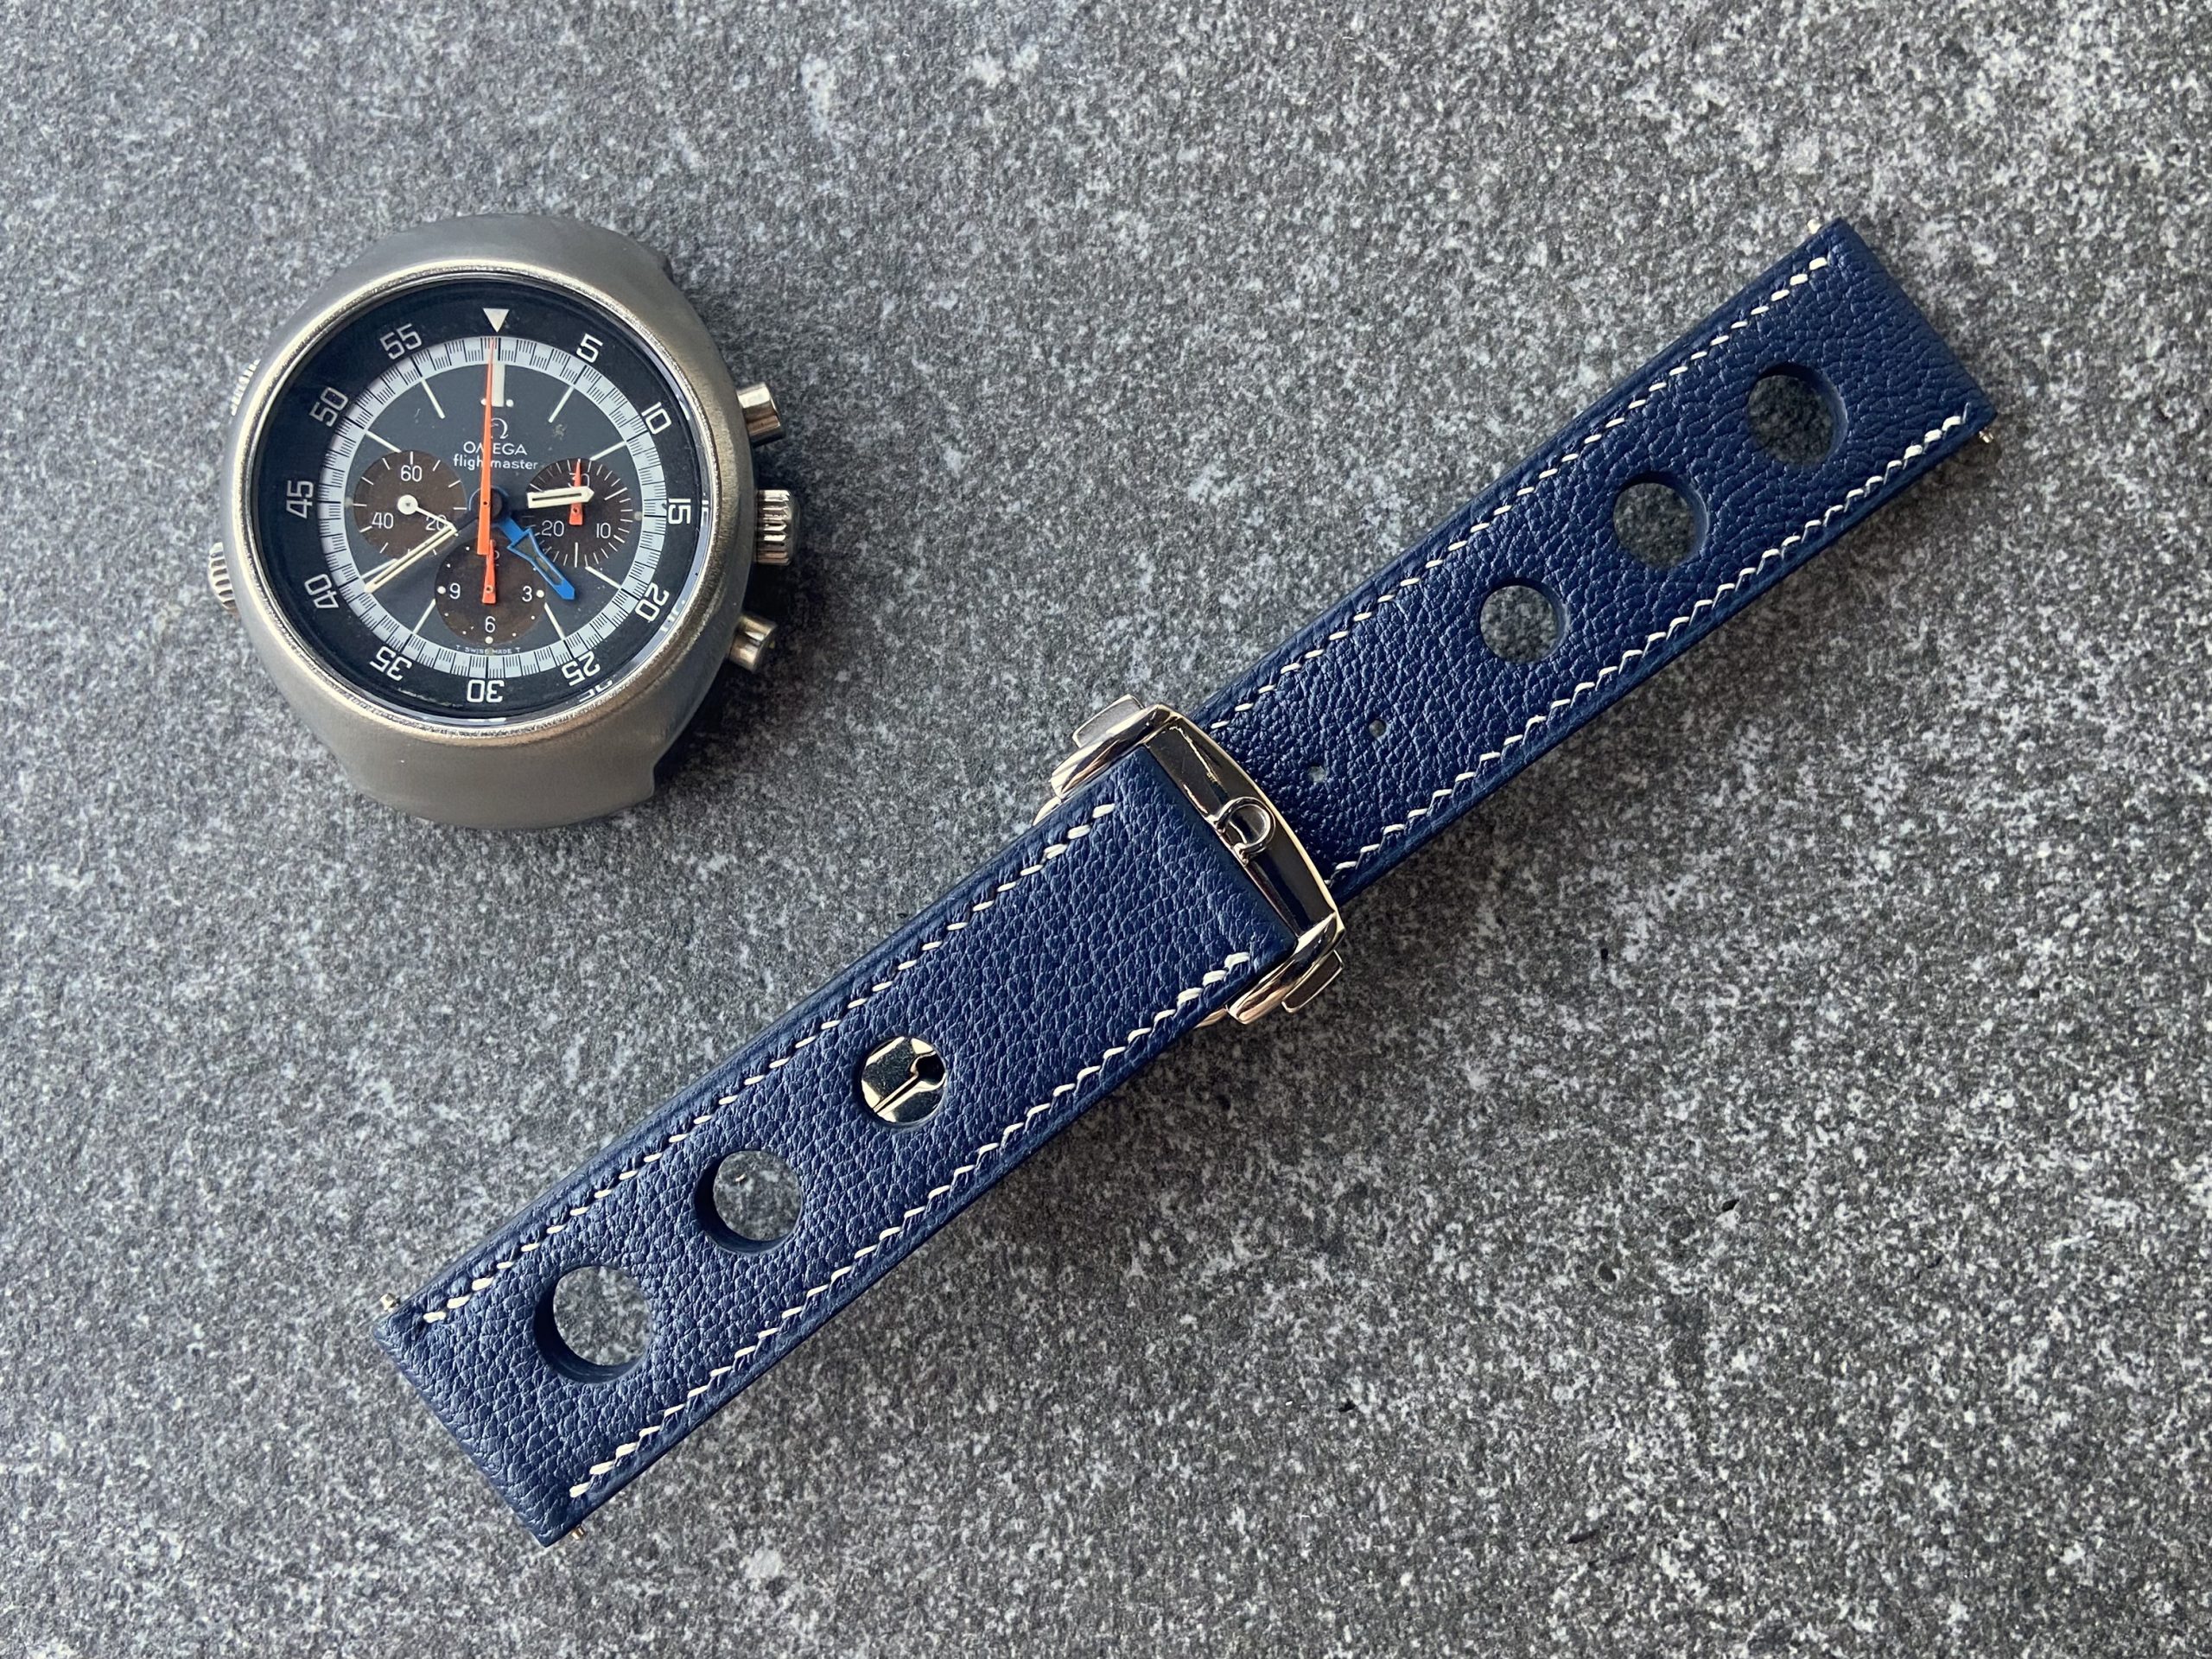 Leather strap for an Omega Flightmaster watch